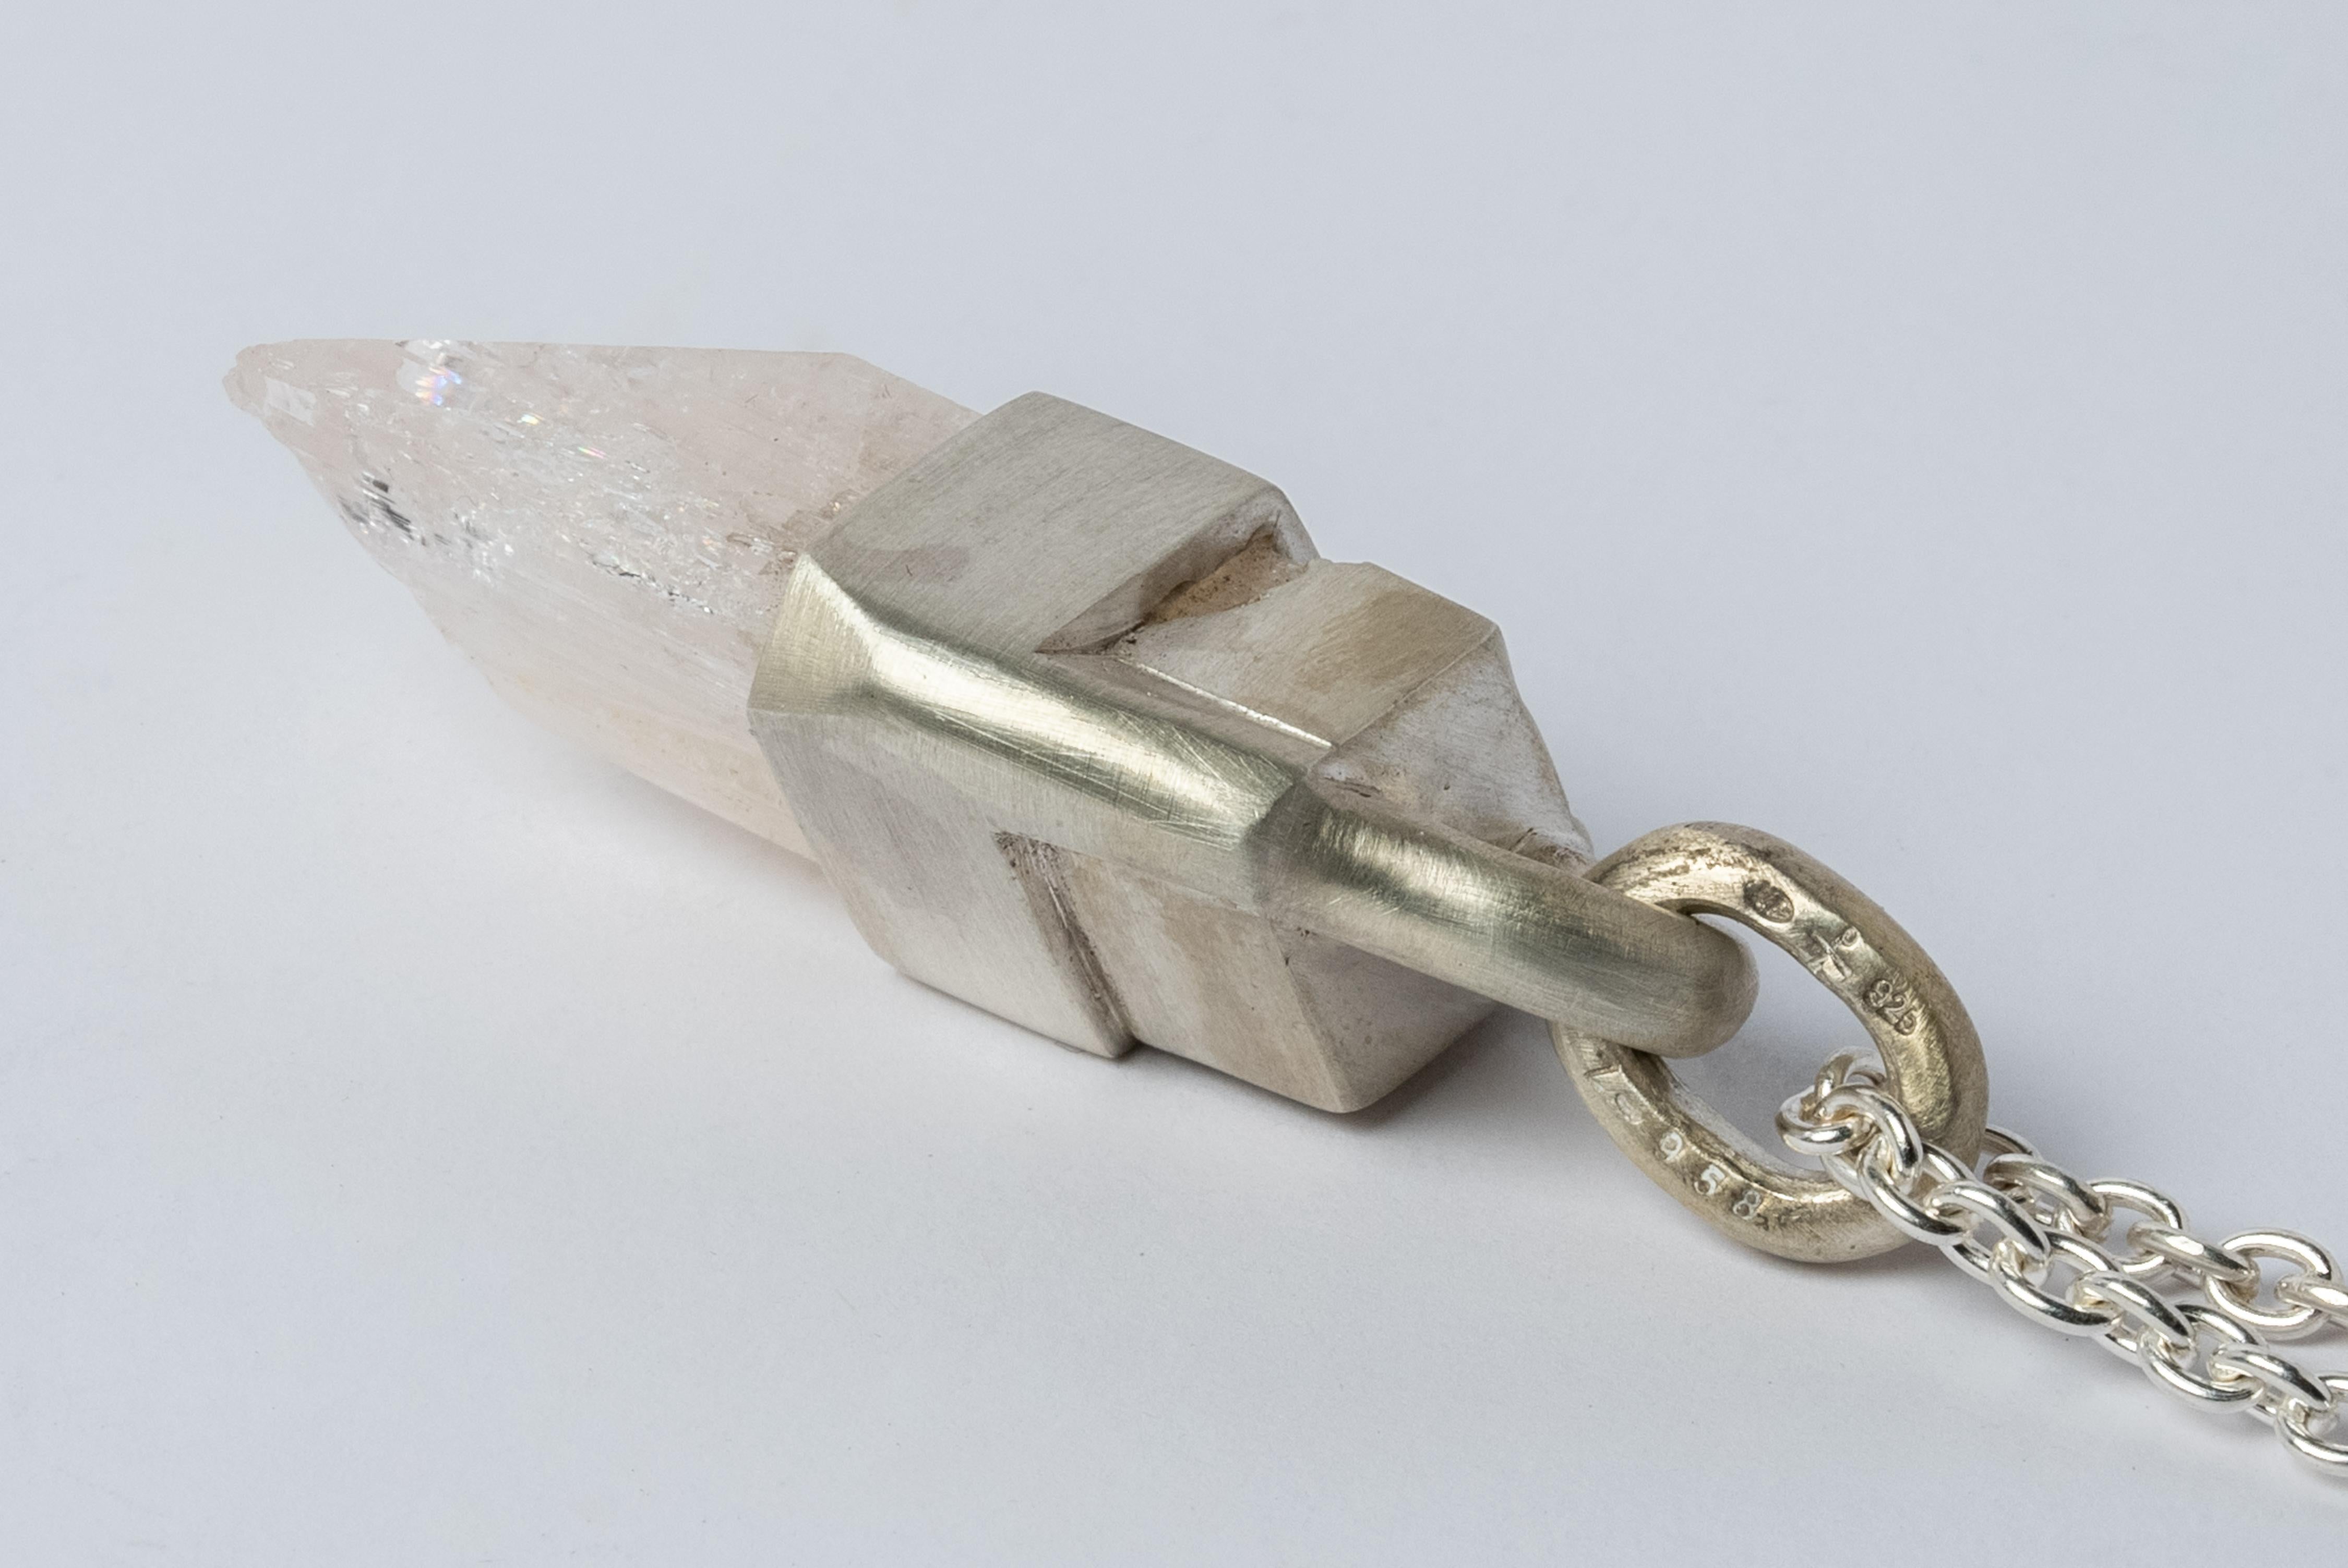 Pendant necklace in sterling silver and a rough of danburite. It comes on 74 cm sterling silver chain.
The Talisman series is an exploration into the power of natural crystals. The crystals used in these pieces are discovered through adventure and